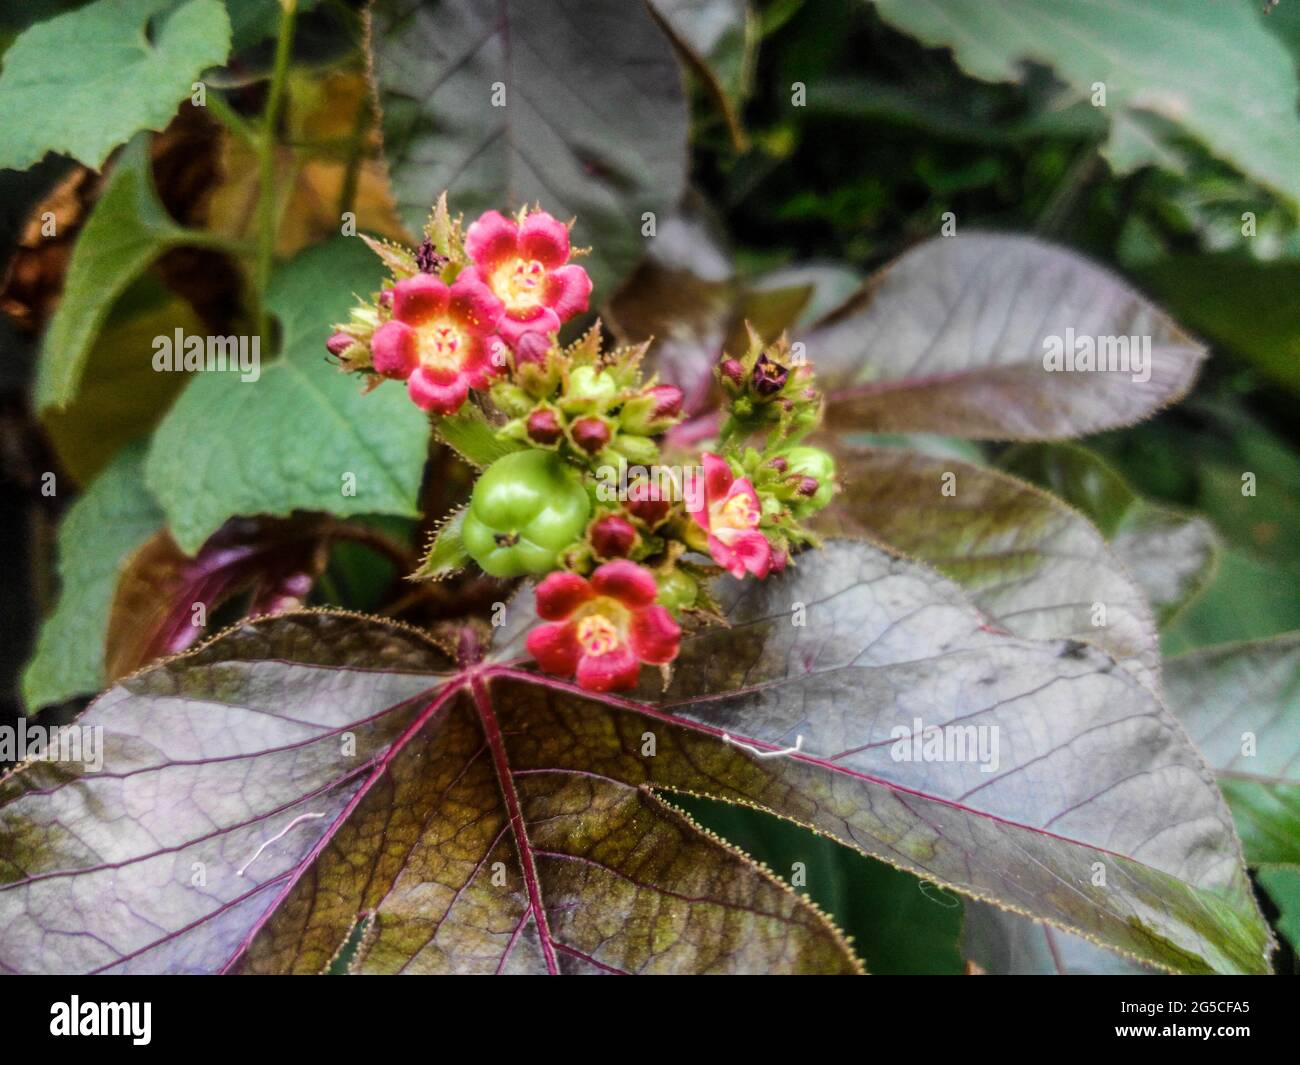 Flowers of a black physicnut plant growing in the garden Stock Photo